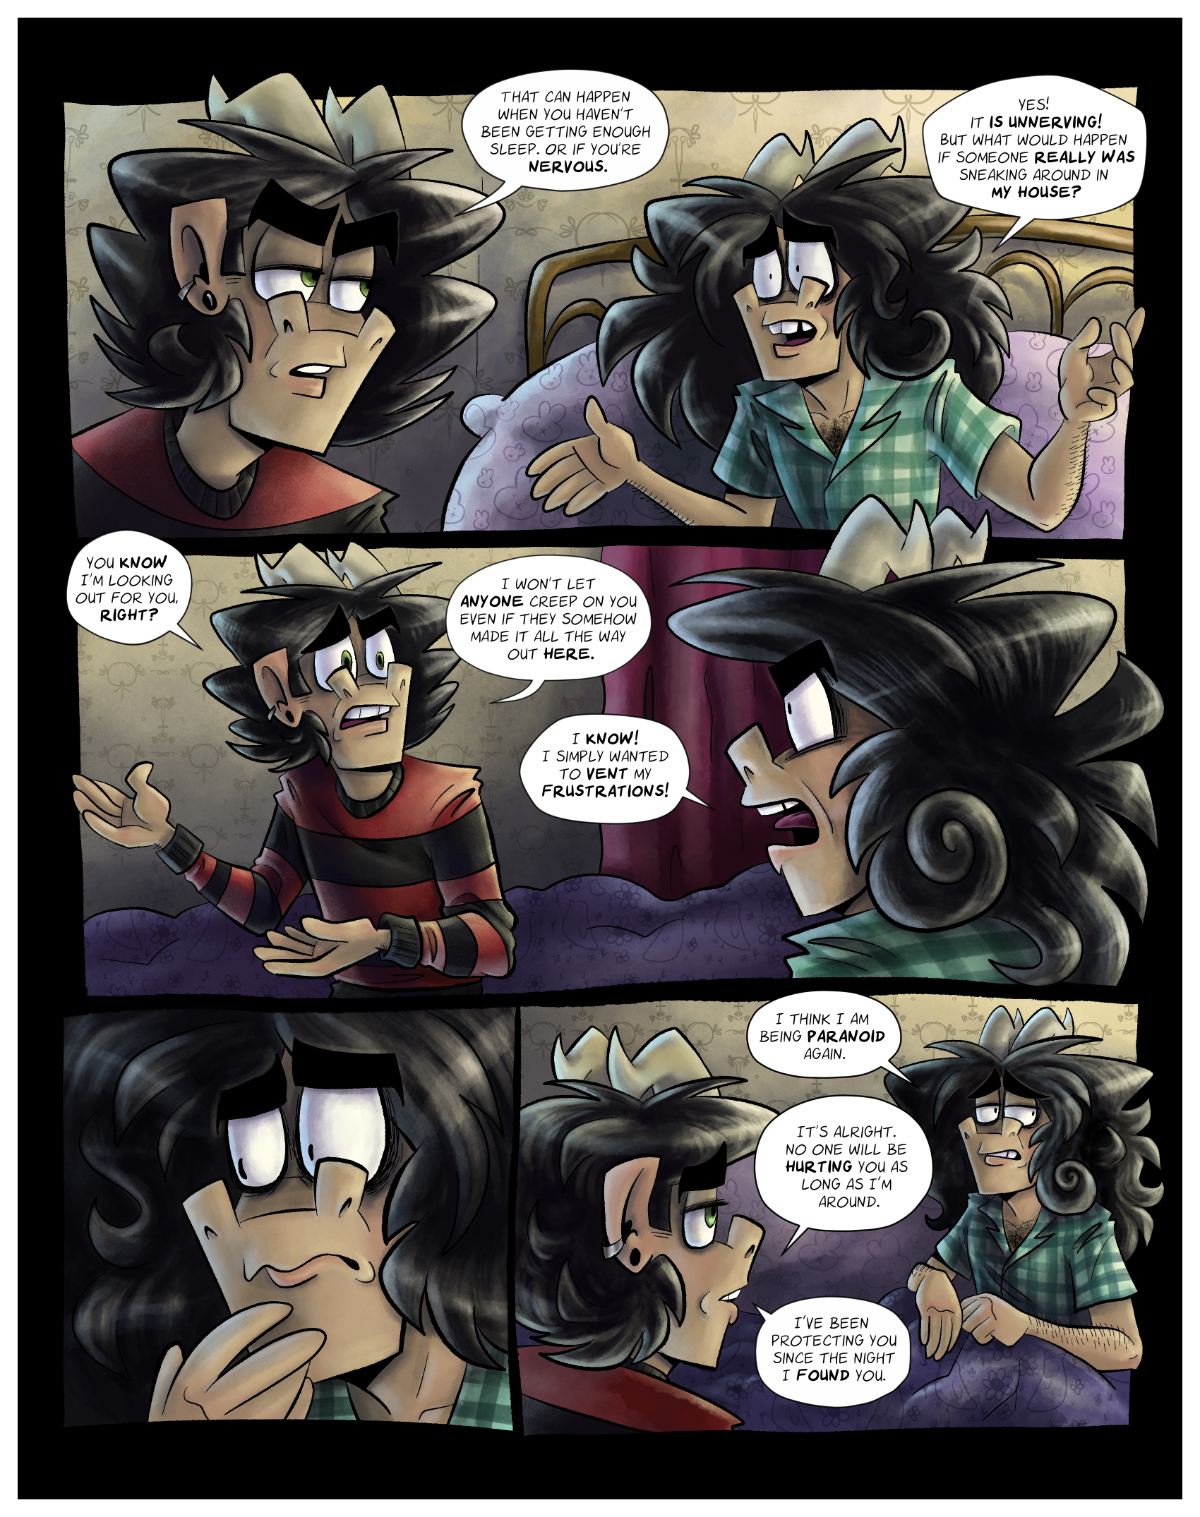 Chapter 2 Page 34: dodging the question